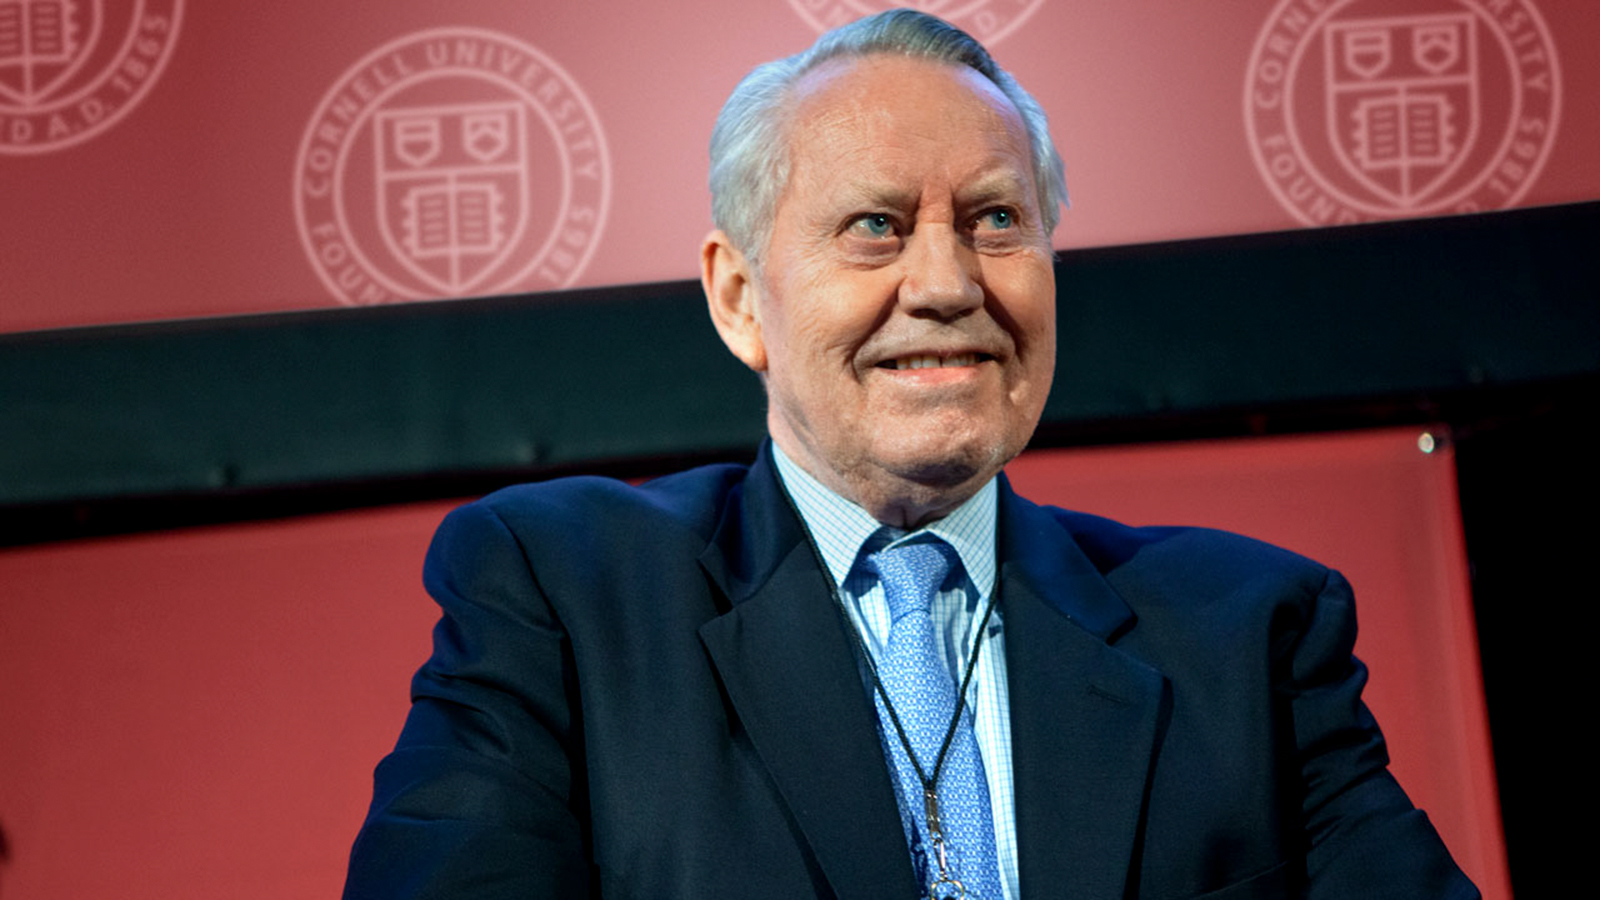 Chuck Feeney received the Icon of the Industry Award from Cornell’s then-School of Hotel Administration in 2010